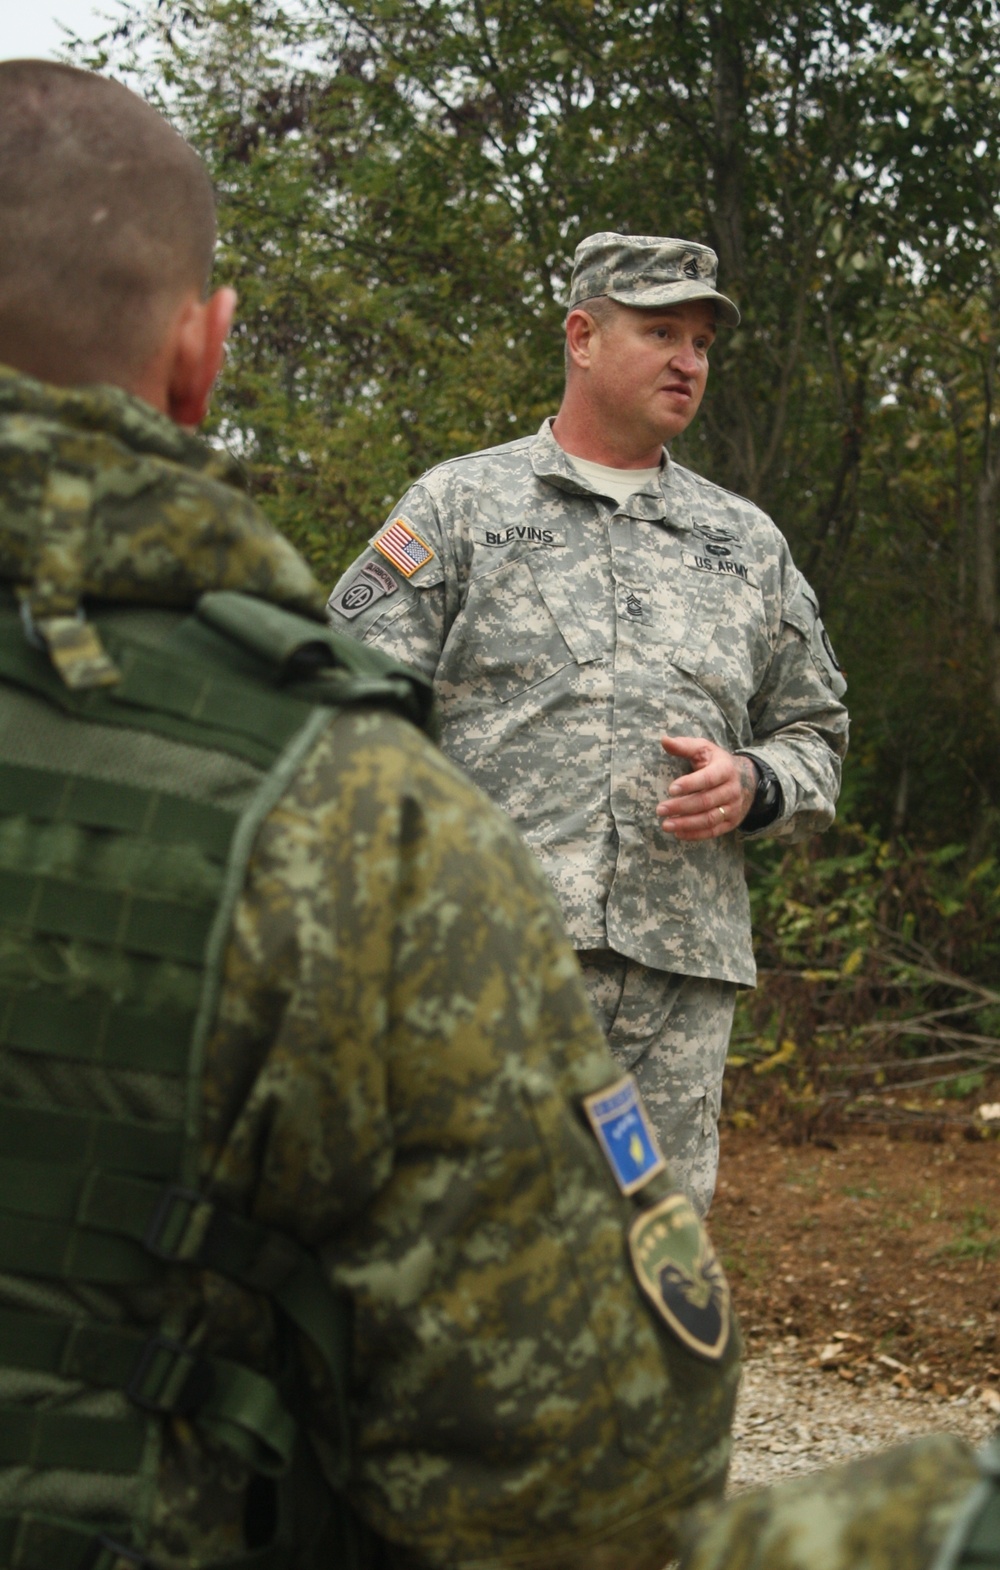 Multinational cooperation: US Army Soldiers partner with KSF TRADOC